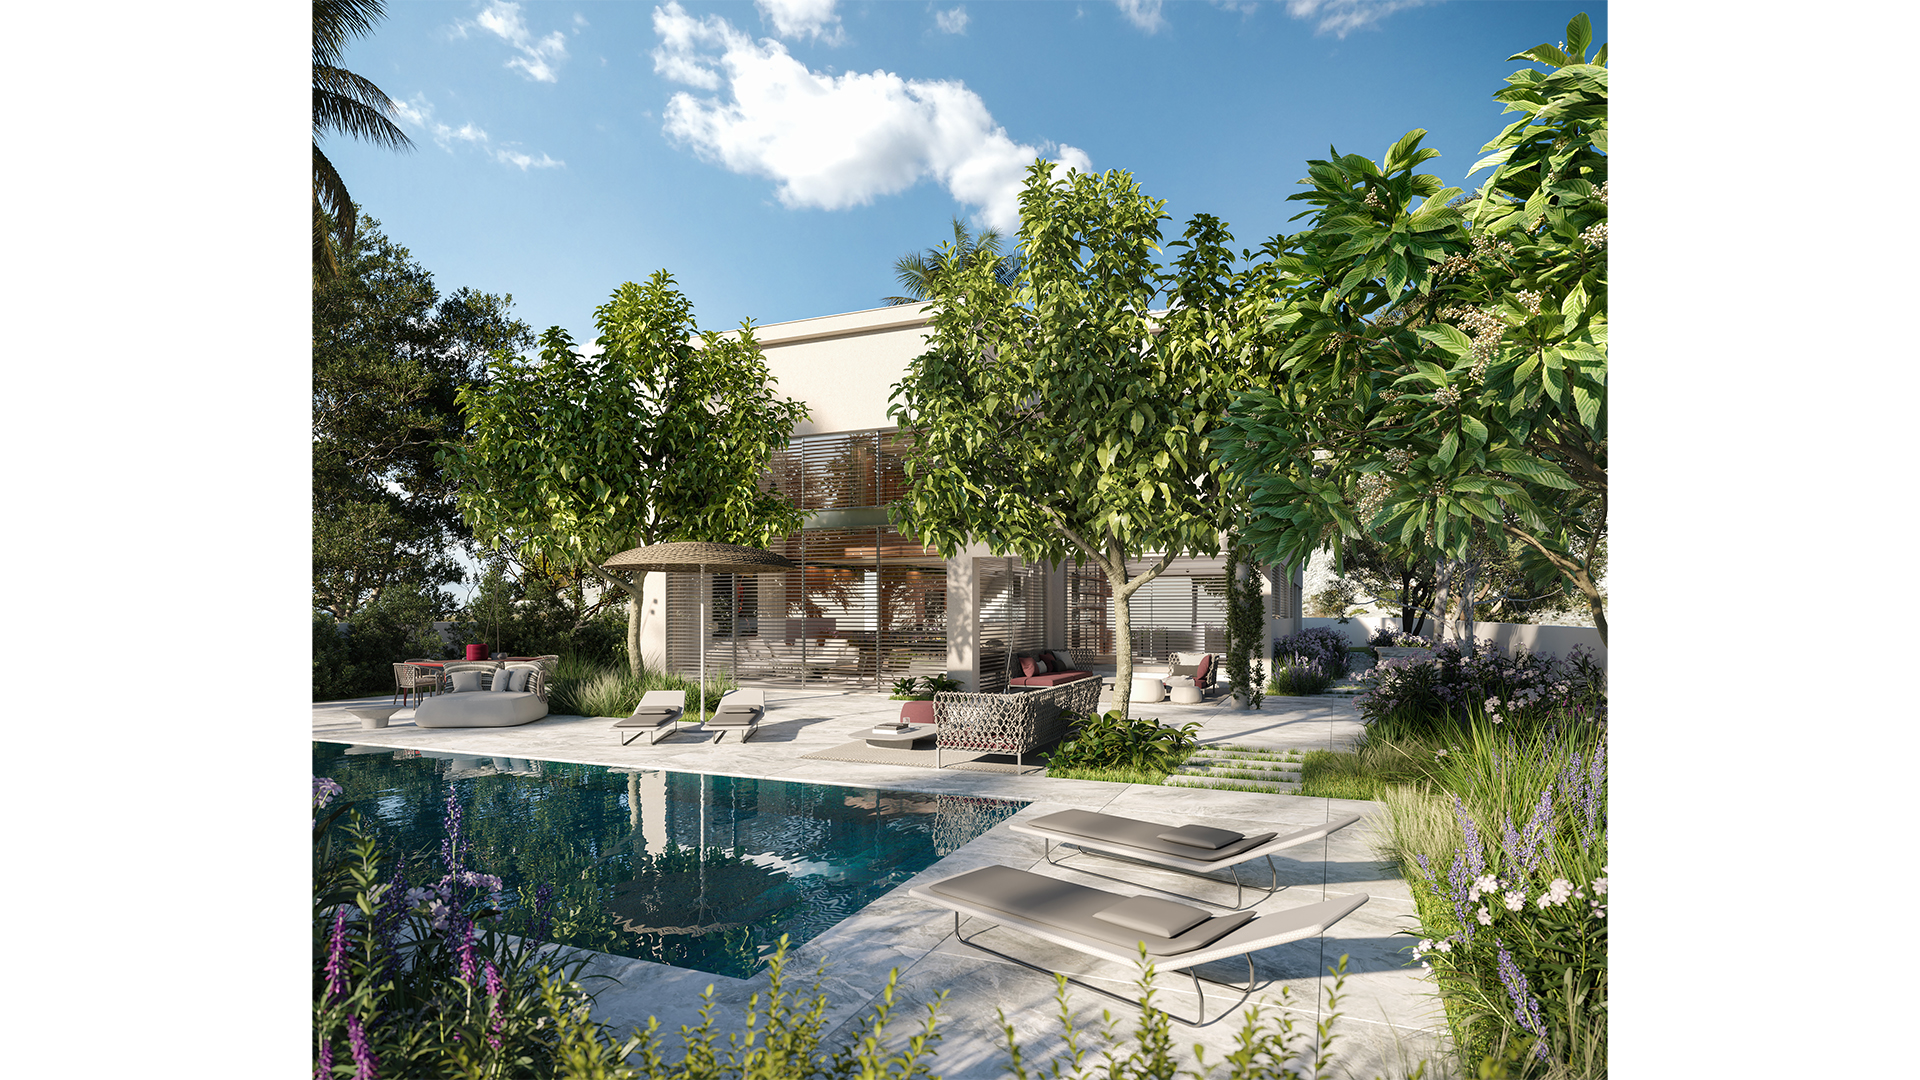 Maayan-Golan_Architectural-Visualization_exterior-visualization_private-residential_pool_back-elevation_architecture-by-tal-tamir_07